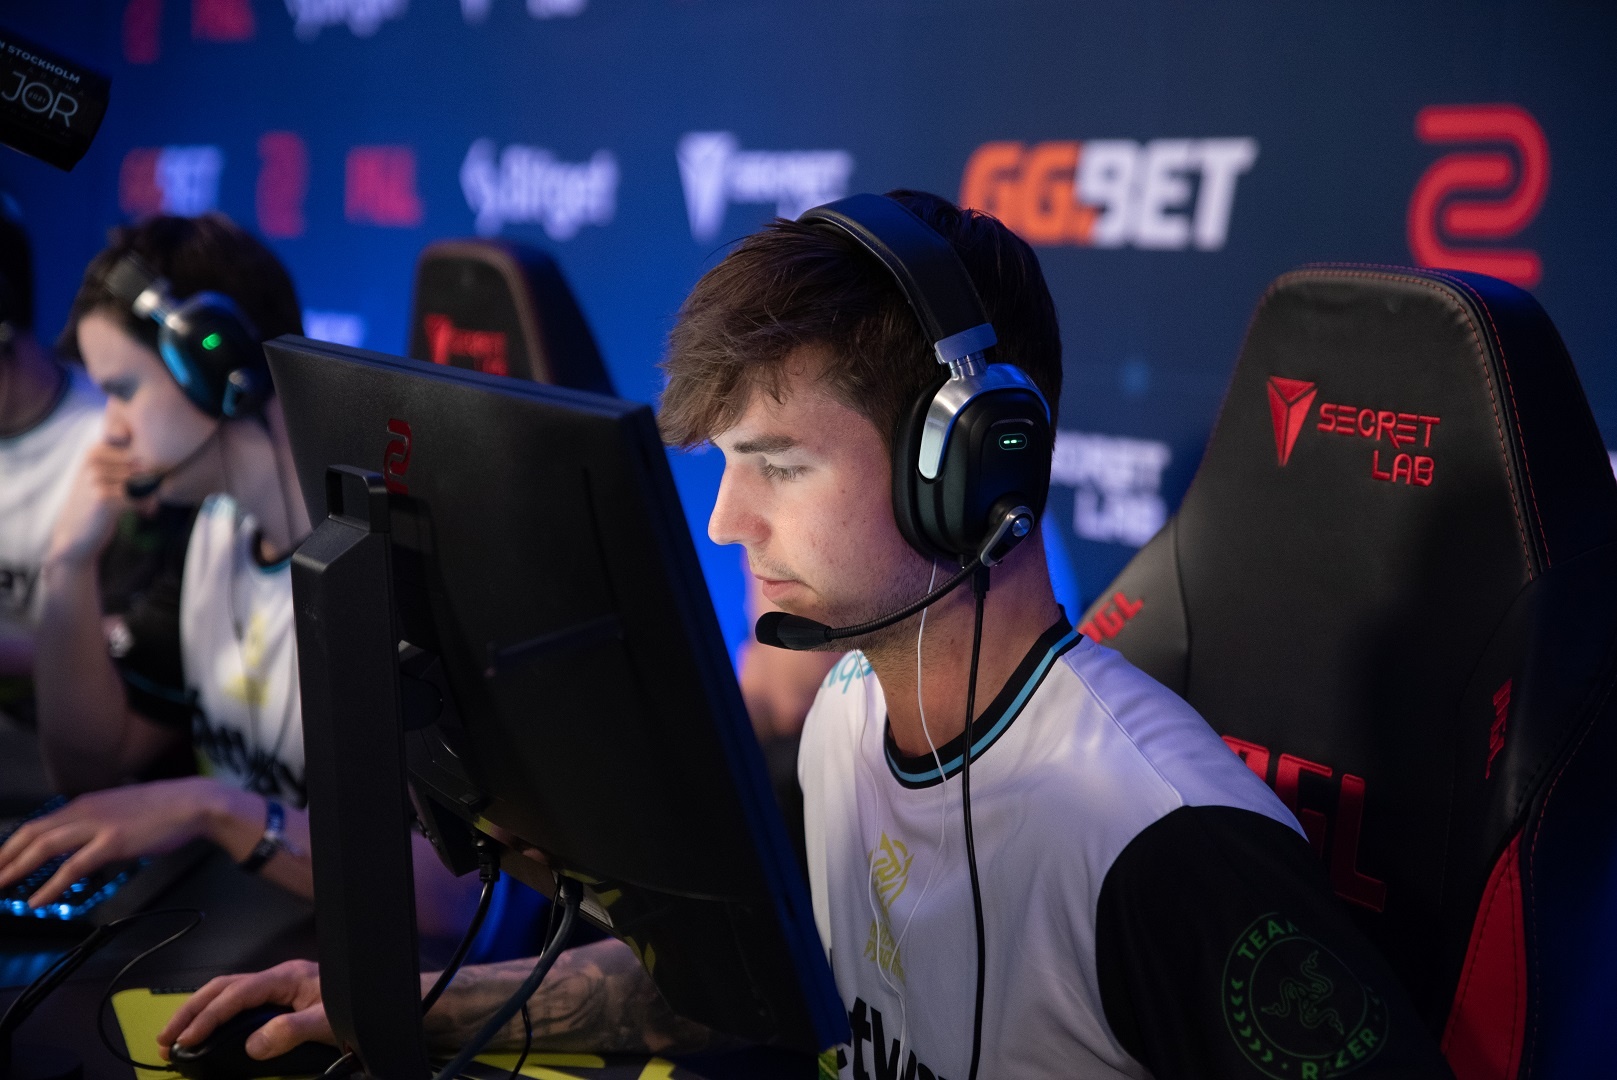 Dev1ce faced mental problems that caused him to become inactive